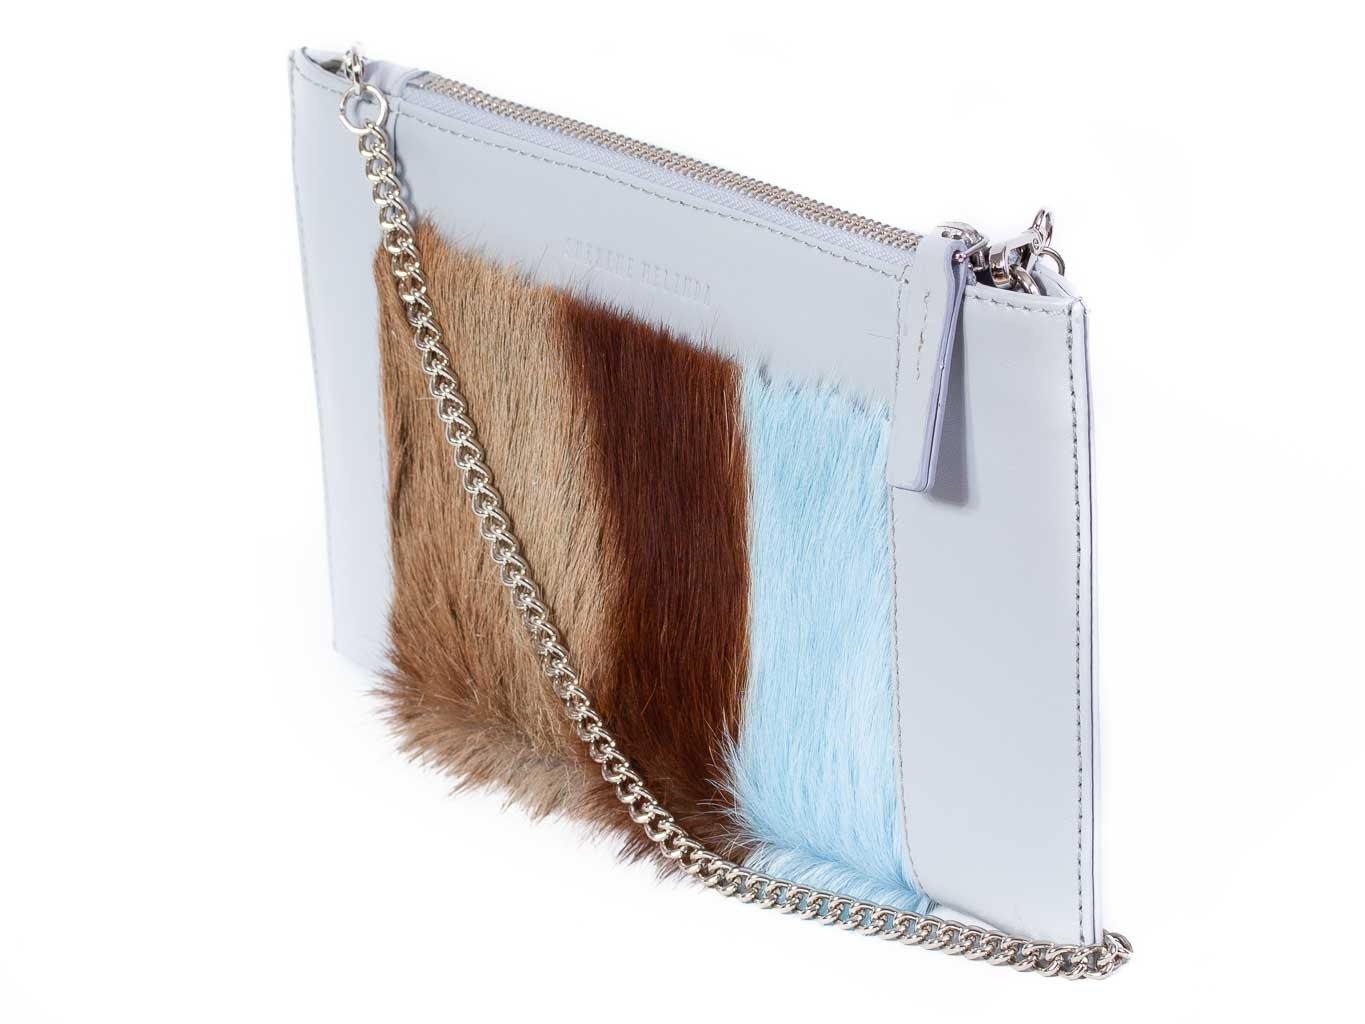 Clutch Springbok Handbag in Baby Blue with a stripe feature by Sherene Melinda angle strap